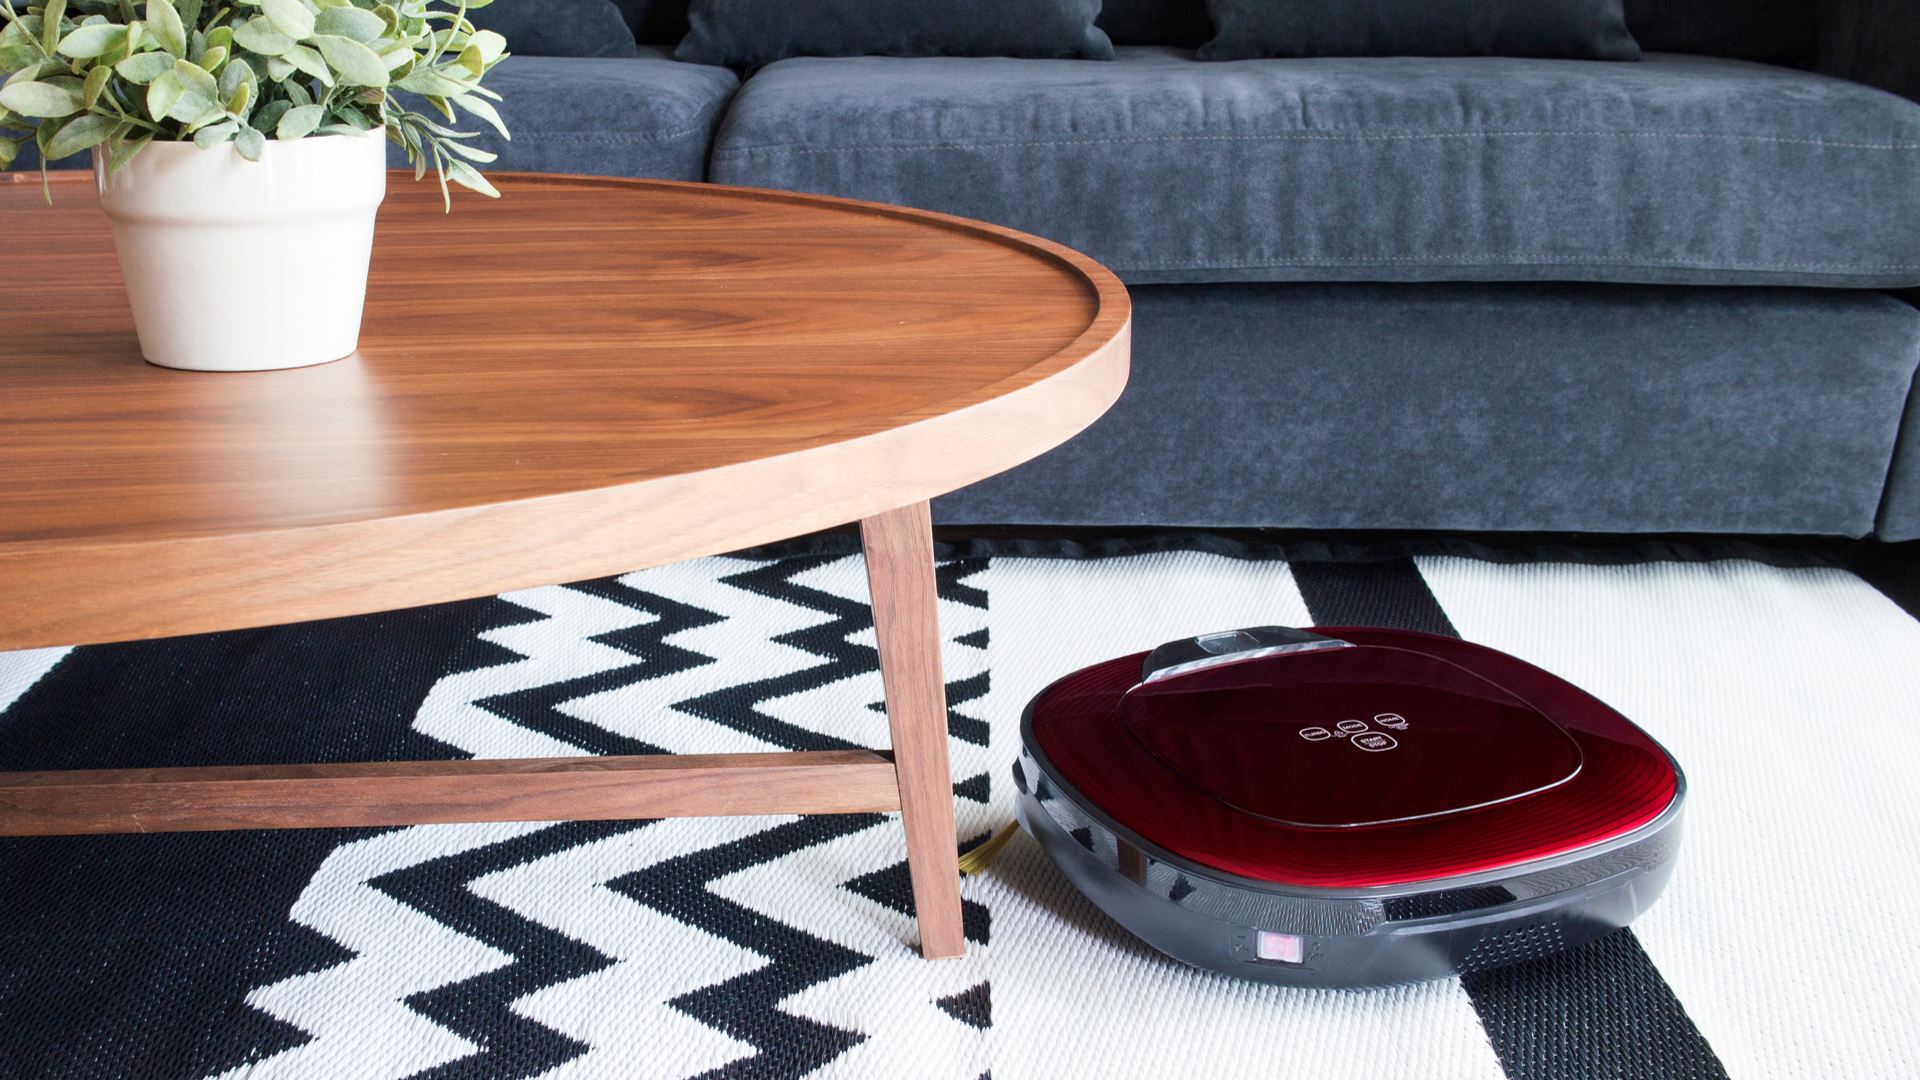 Robotic vacuum cleaner on carpet in cozy living room with navy blue sofa and wooden table